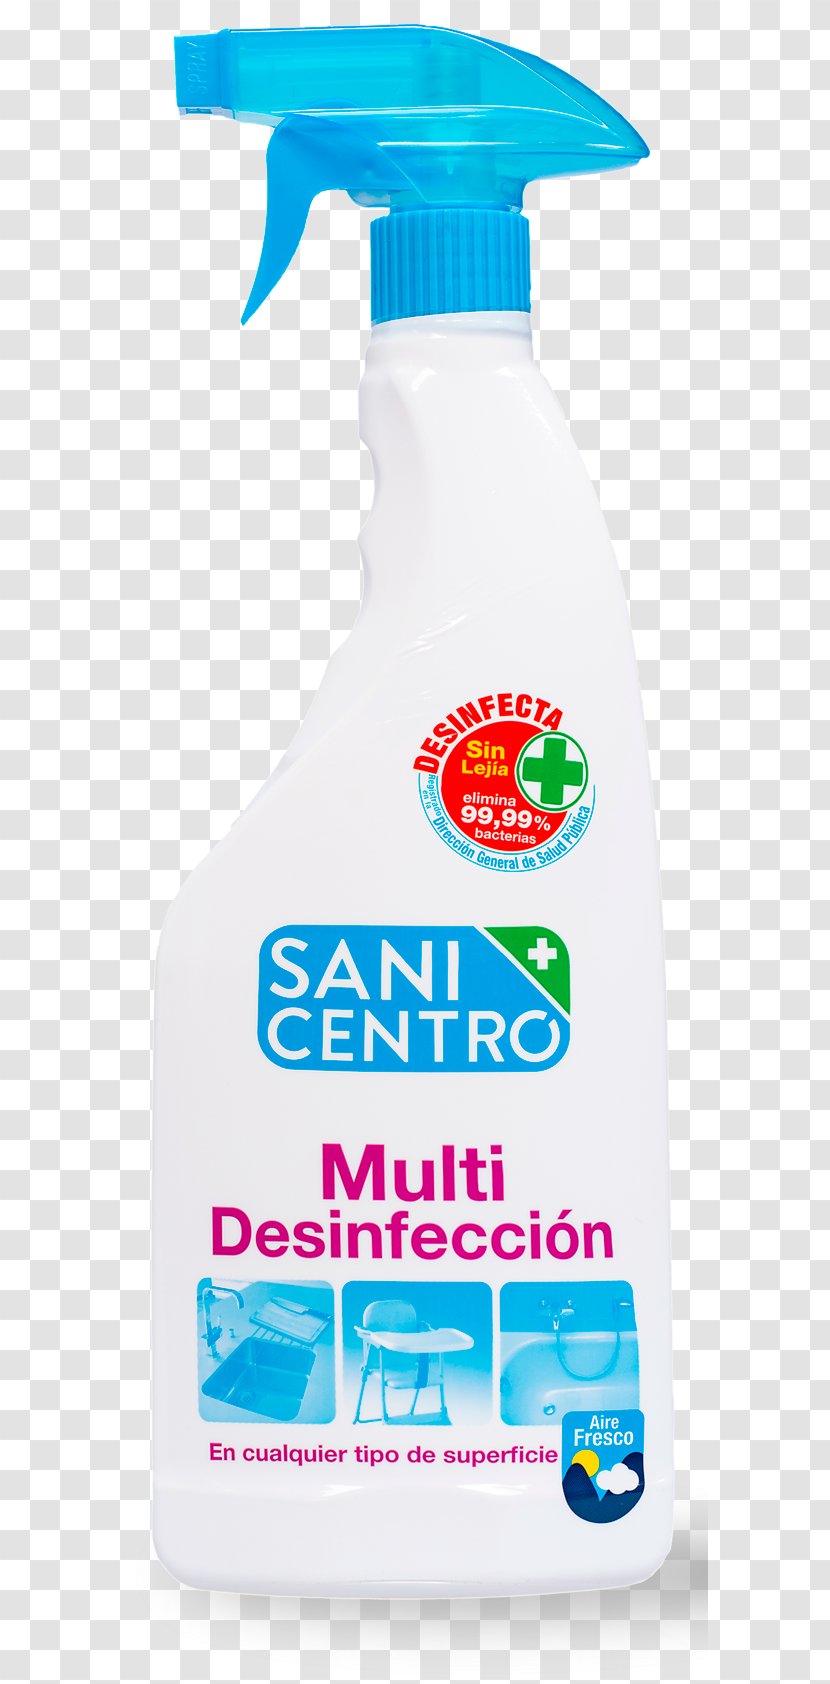 Disinfectants Cleaning Cleaner Bottle - Air Fresheners - Face Mask Transparent PNG